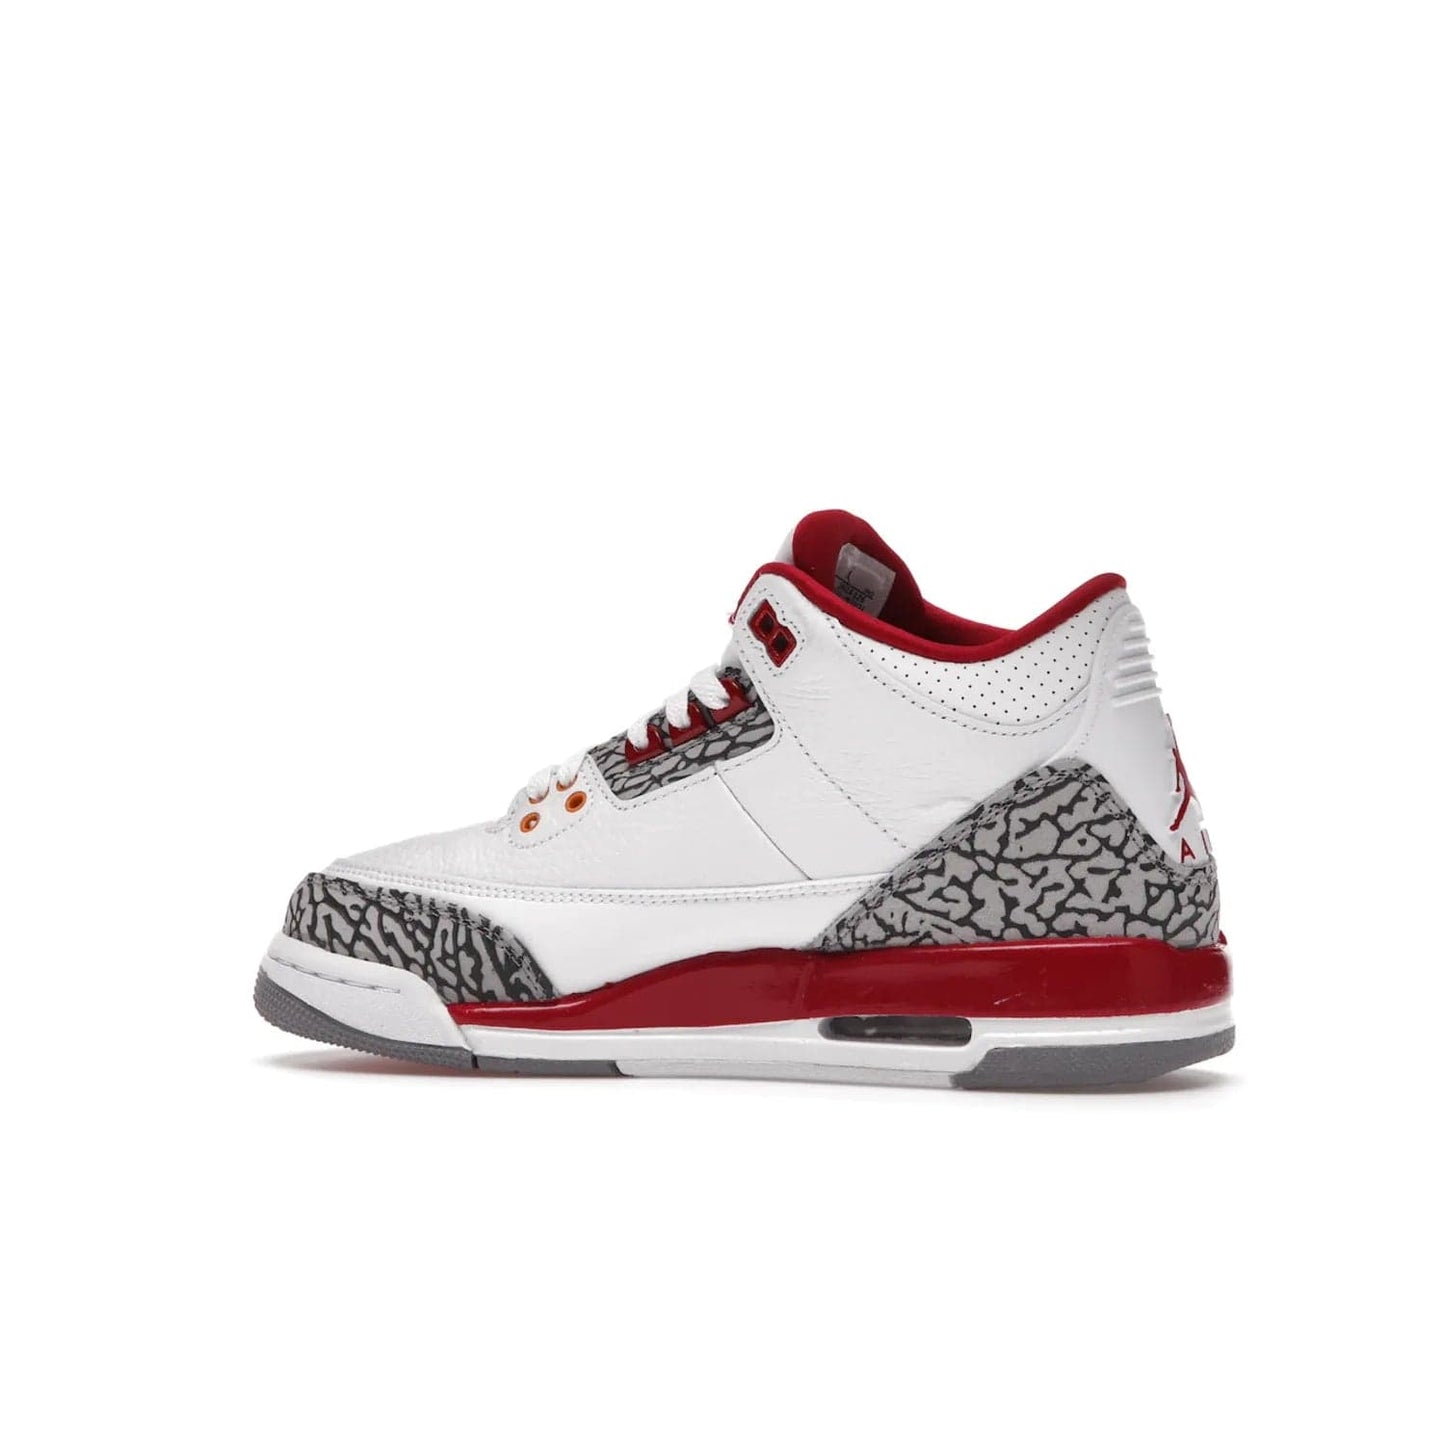 Jordan 3 Retro Cardinal (GS) - Image 21 - Only at www.BallersClubKickz.com - Shop the kid-sized Air Jordan 3 Retro Cardinal GS, released Feb 2022. White tumbled leather upper, light curry accenting, cement grey and classic red details throughout. Visible Air cushioning, midsole, and an eye-catching outsole. Show off your style with this fashionable streetwear silhouette.